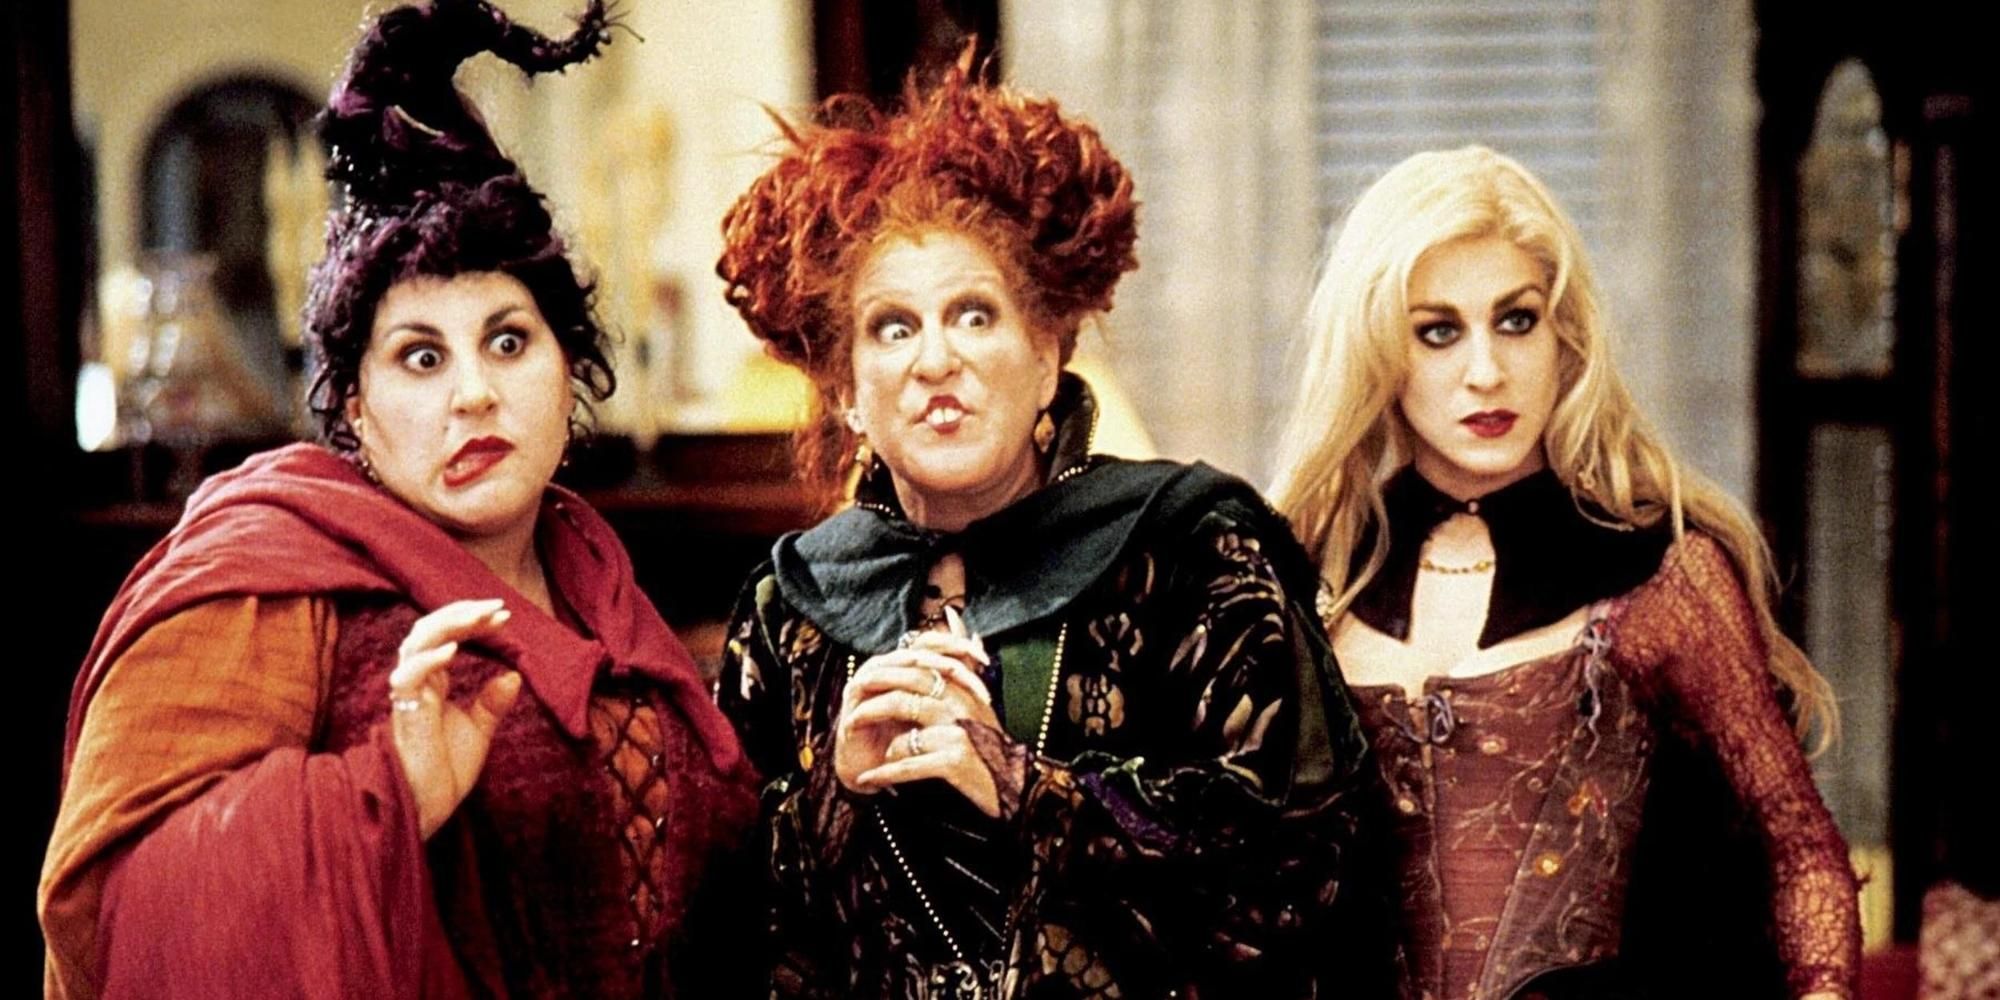 Mary, Winifred, and Sarah in Hocus Pocus